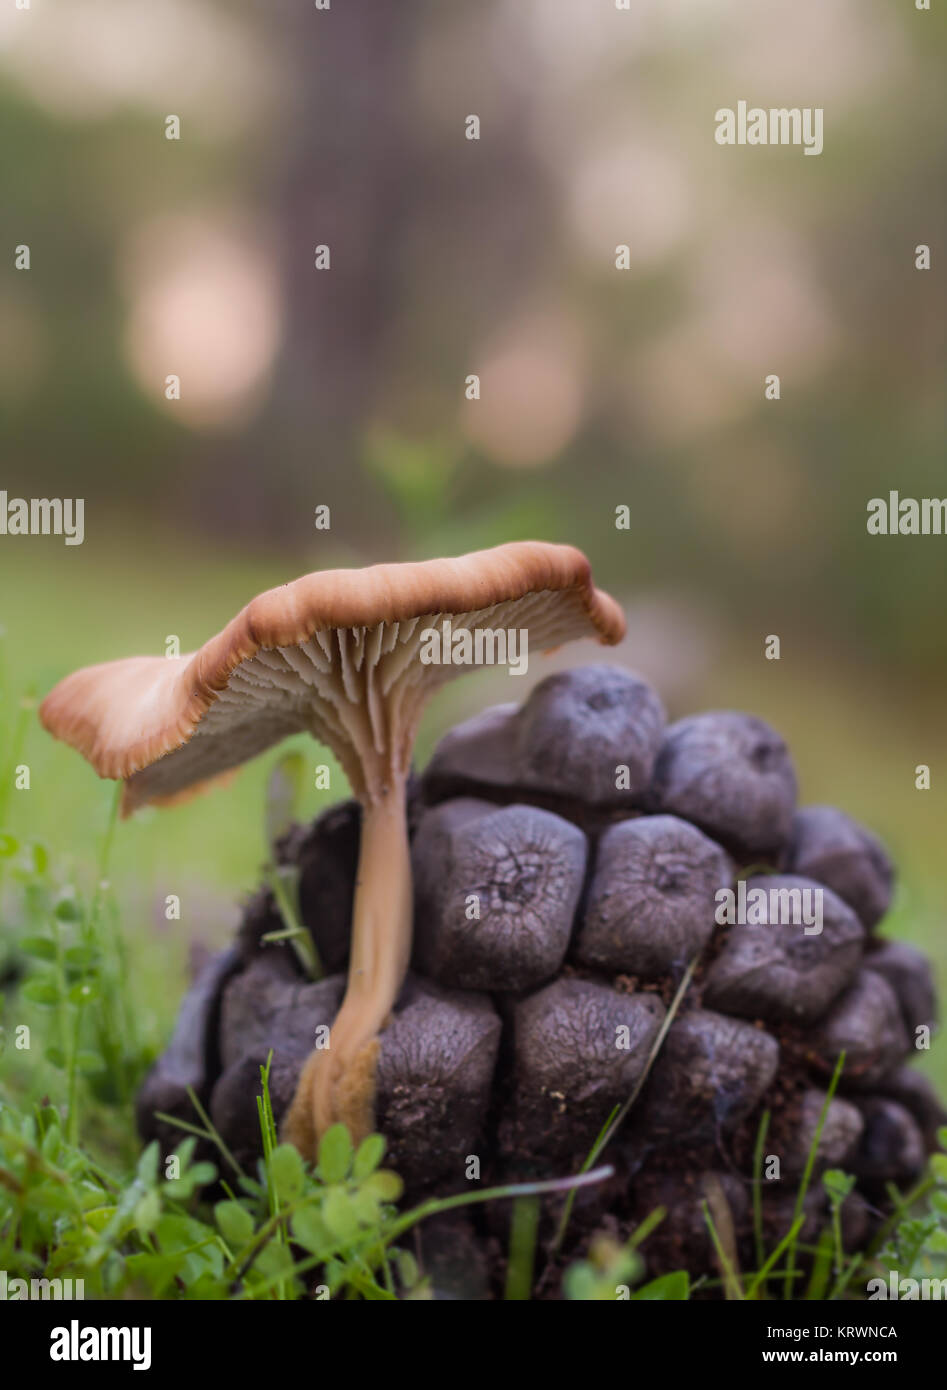 Mushroom photographed in a pine forest. Stock Photo